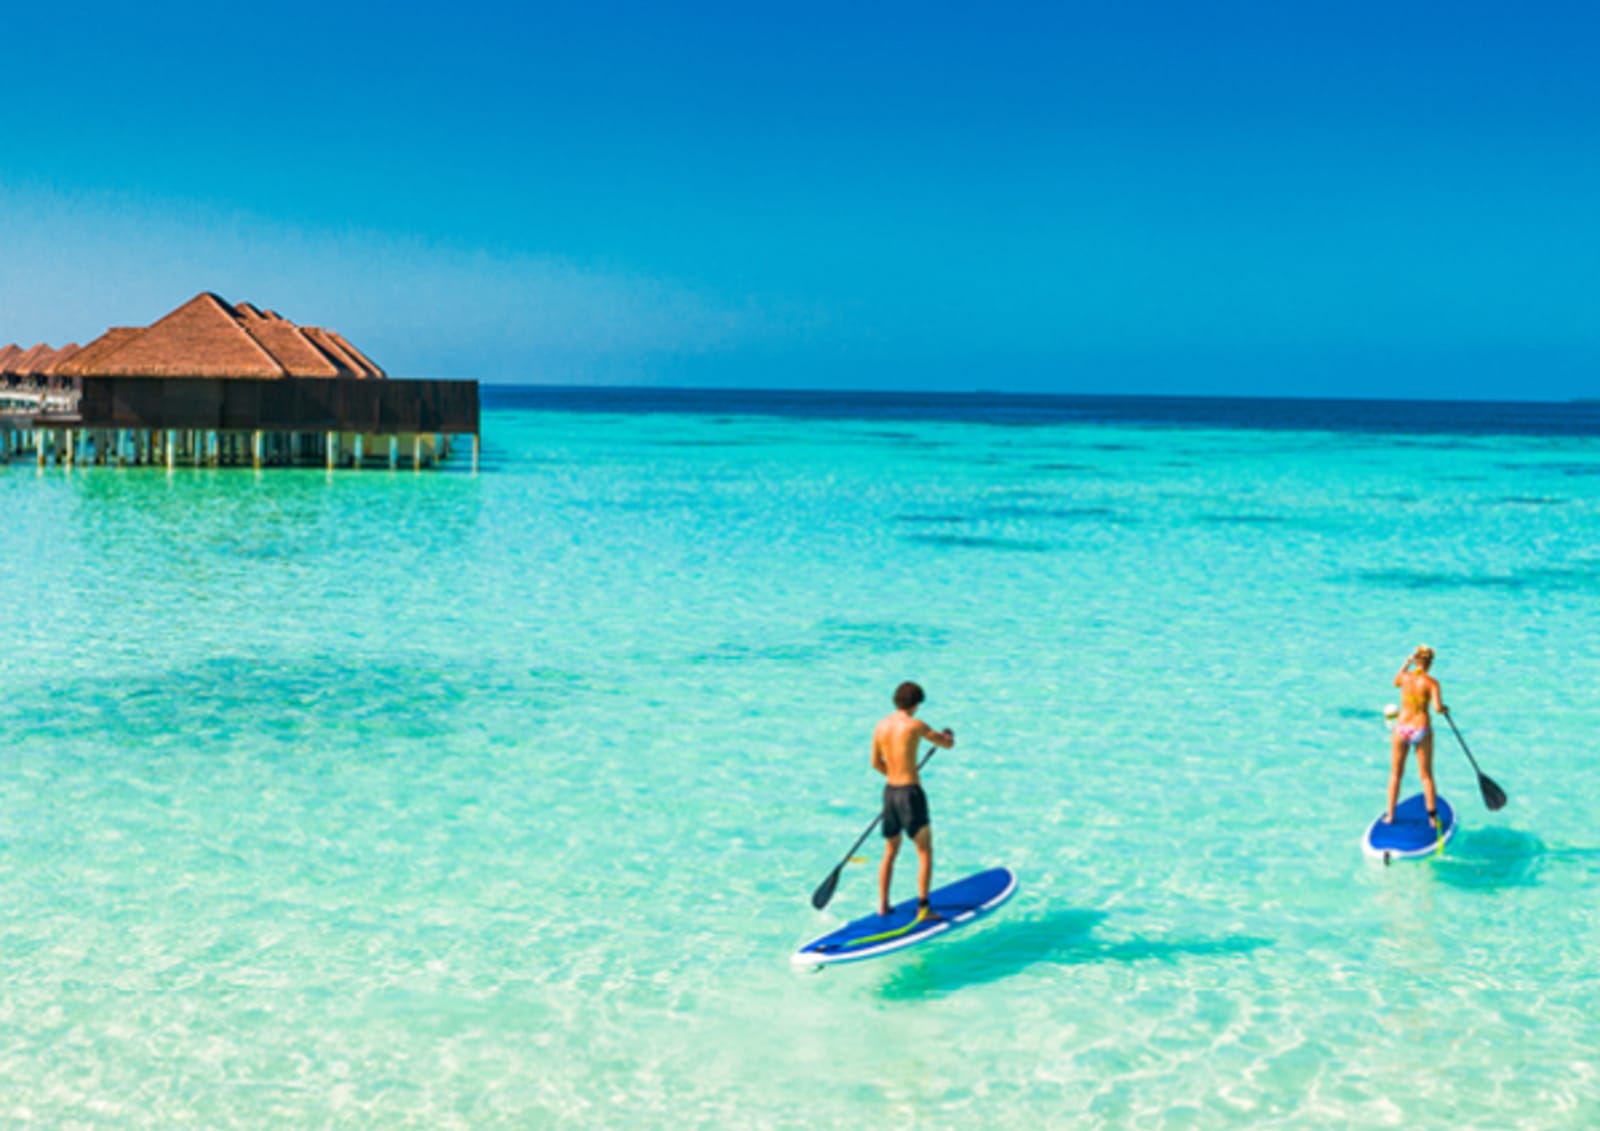 Two people on stand-up paddleboards on a clear ocean, with rows of bungalows in the background